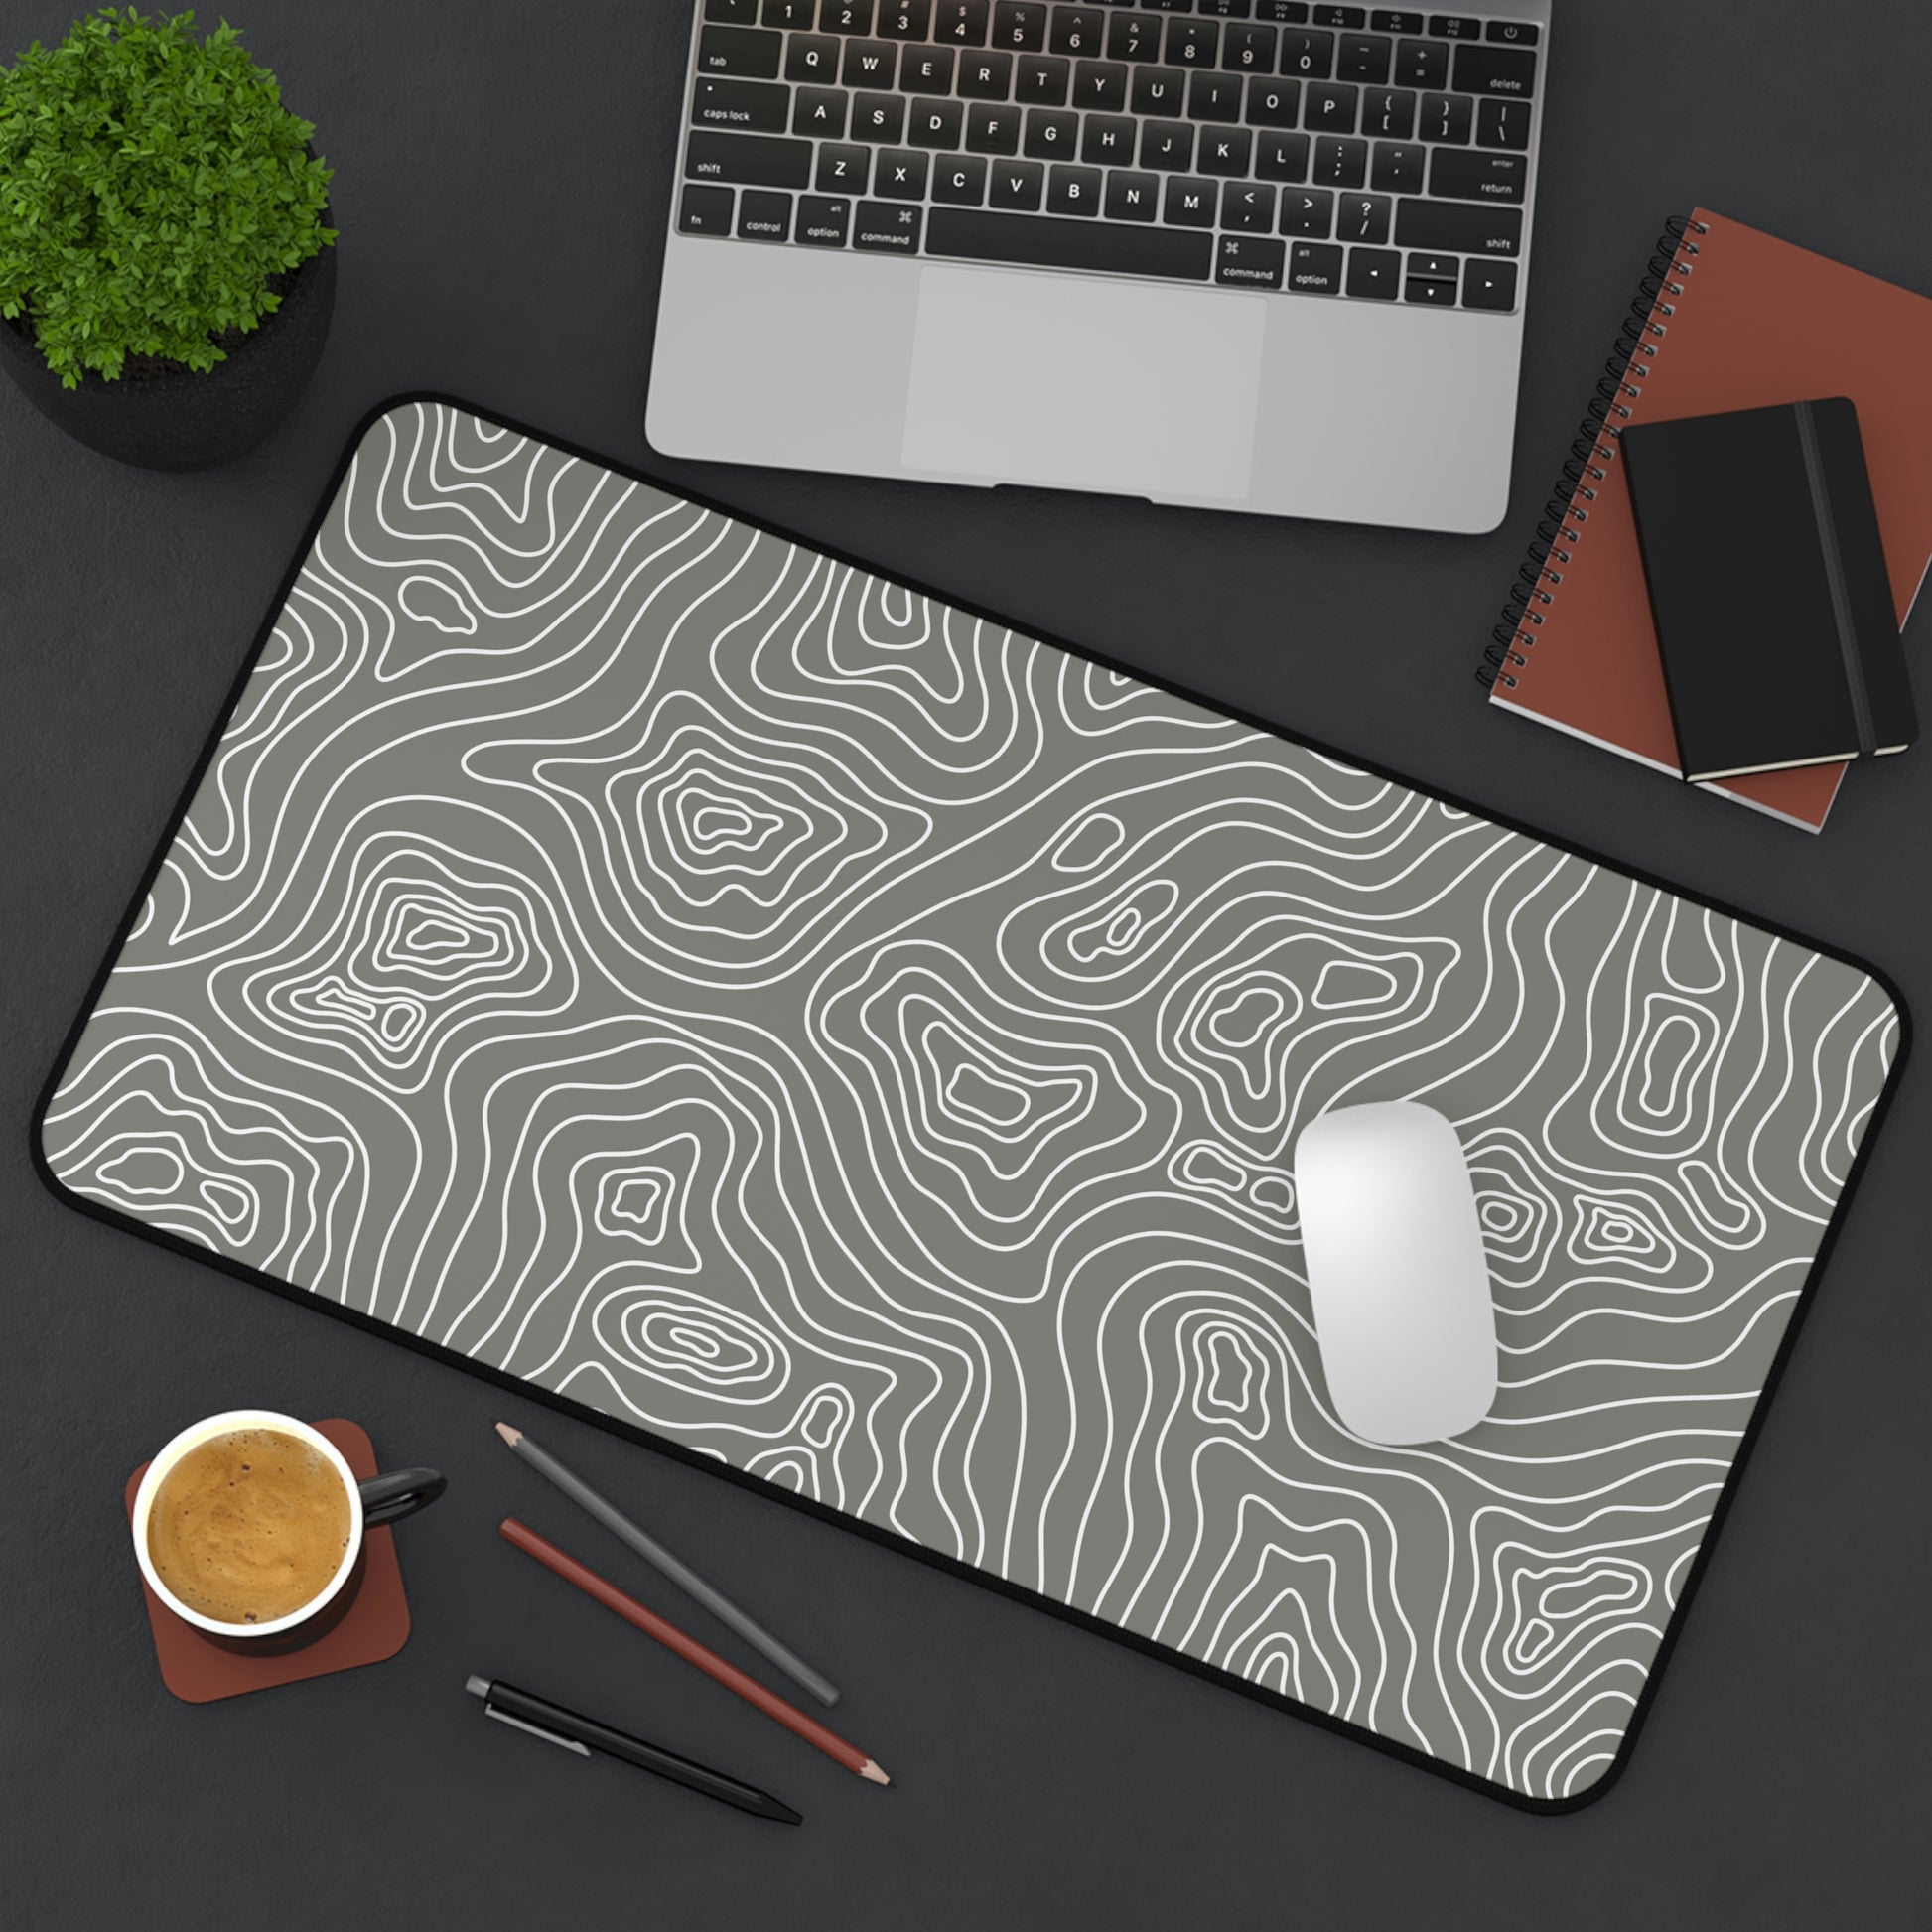 A 12" x 22" gray desk mat with white topographic lines sitting at an angle. A mouse sits on top of it.